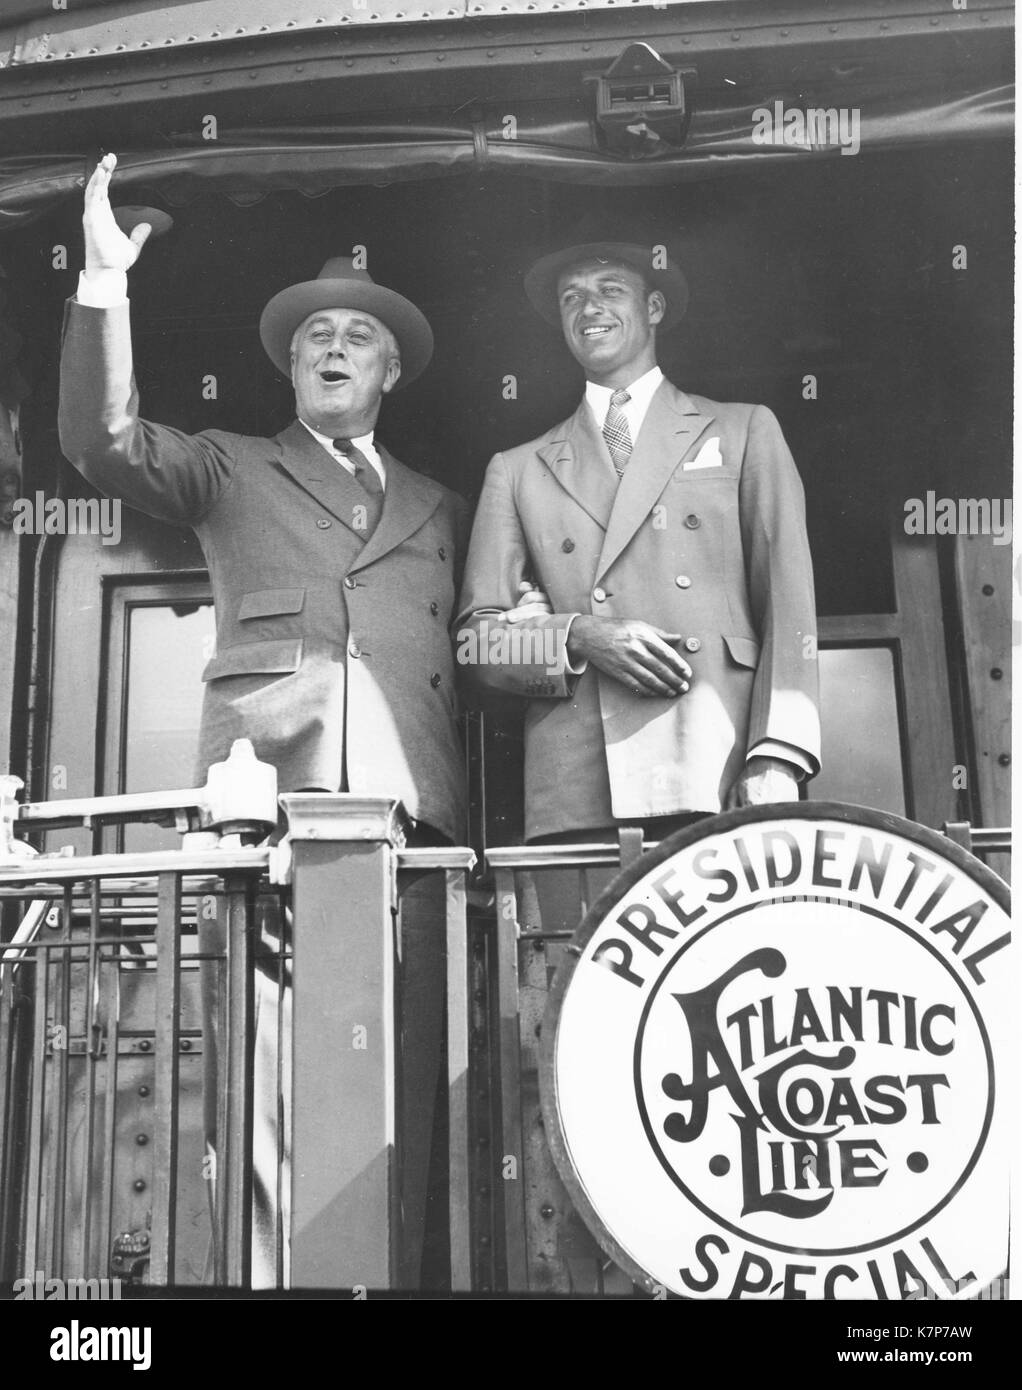 President Franklin D Roosevelt with son James Roosevelt aboard rear of the Presidential Special of the Atlantic Coast Line campaign train, 1934. Stock Photo